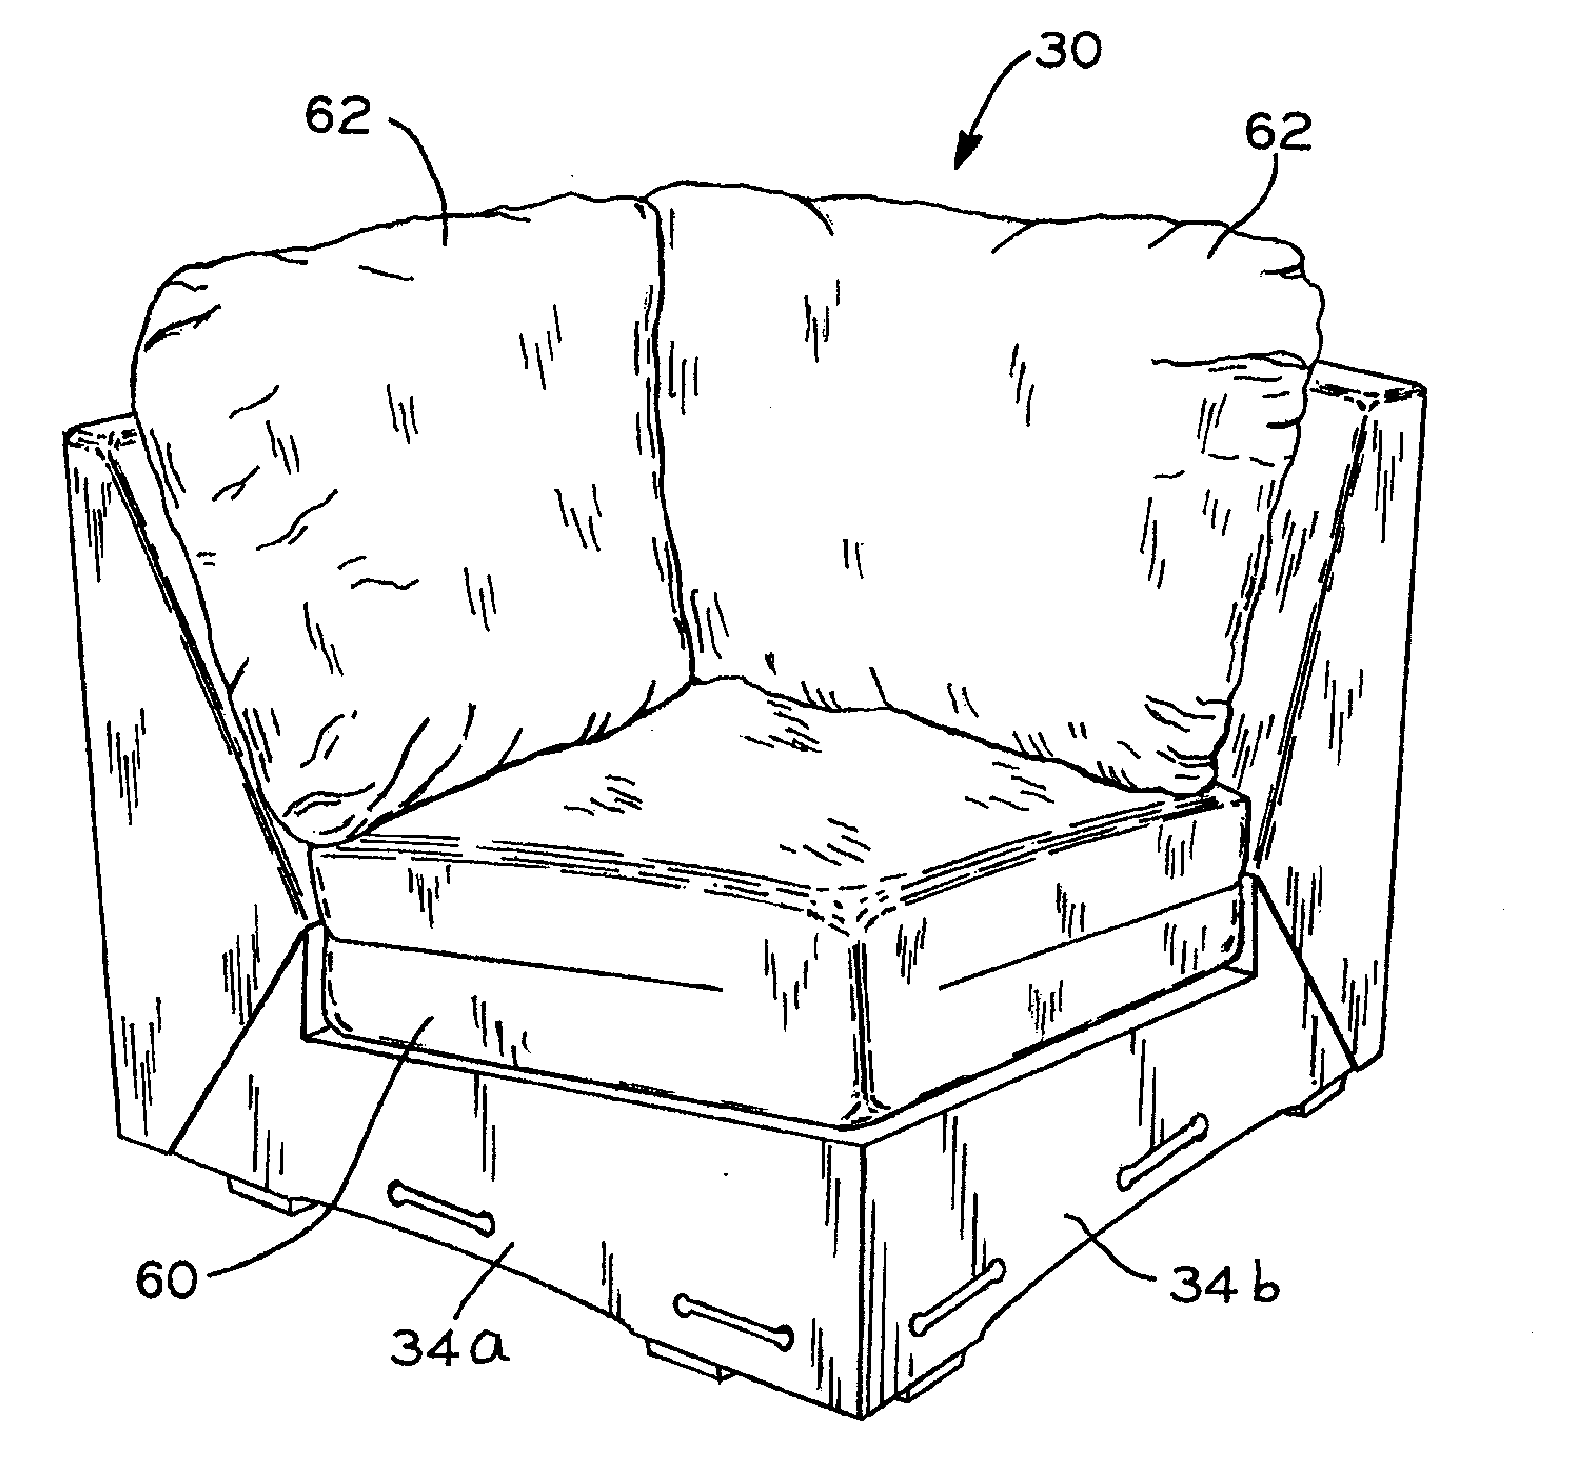 Article of ready-to-assemble furniture